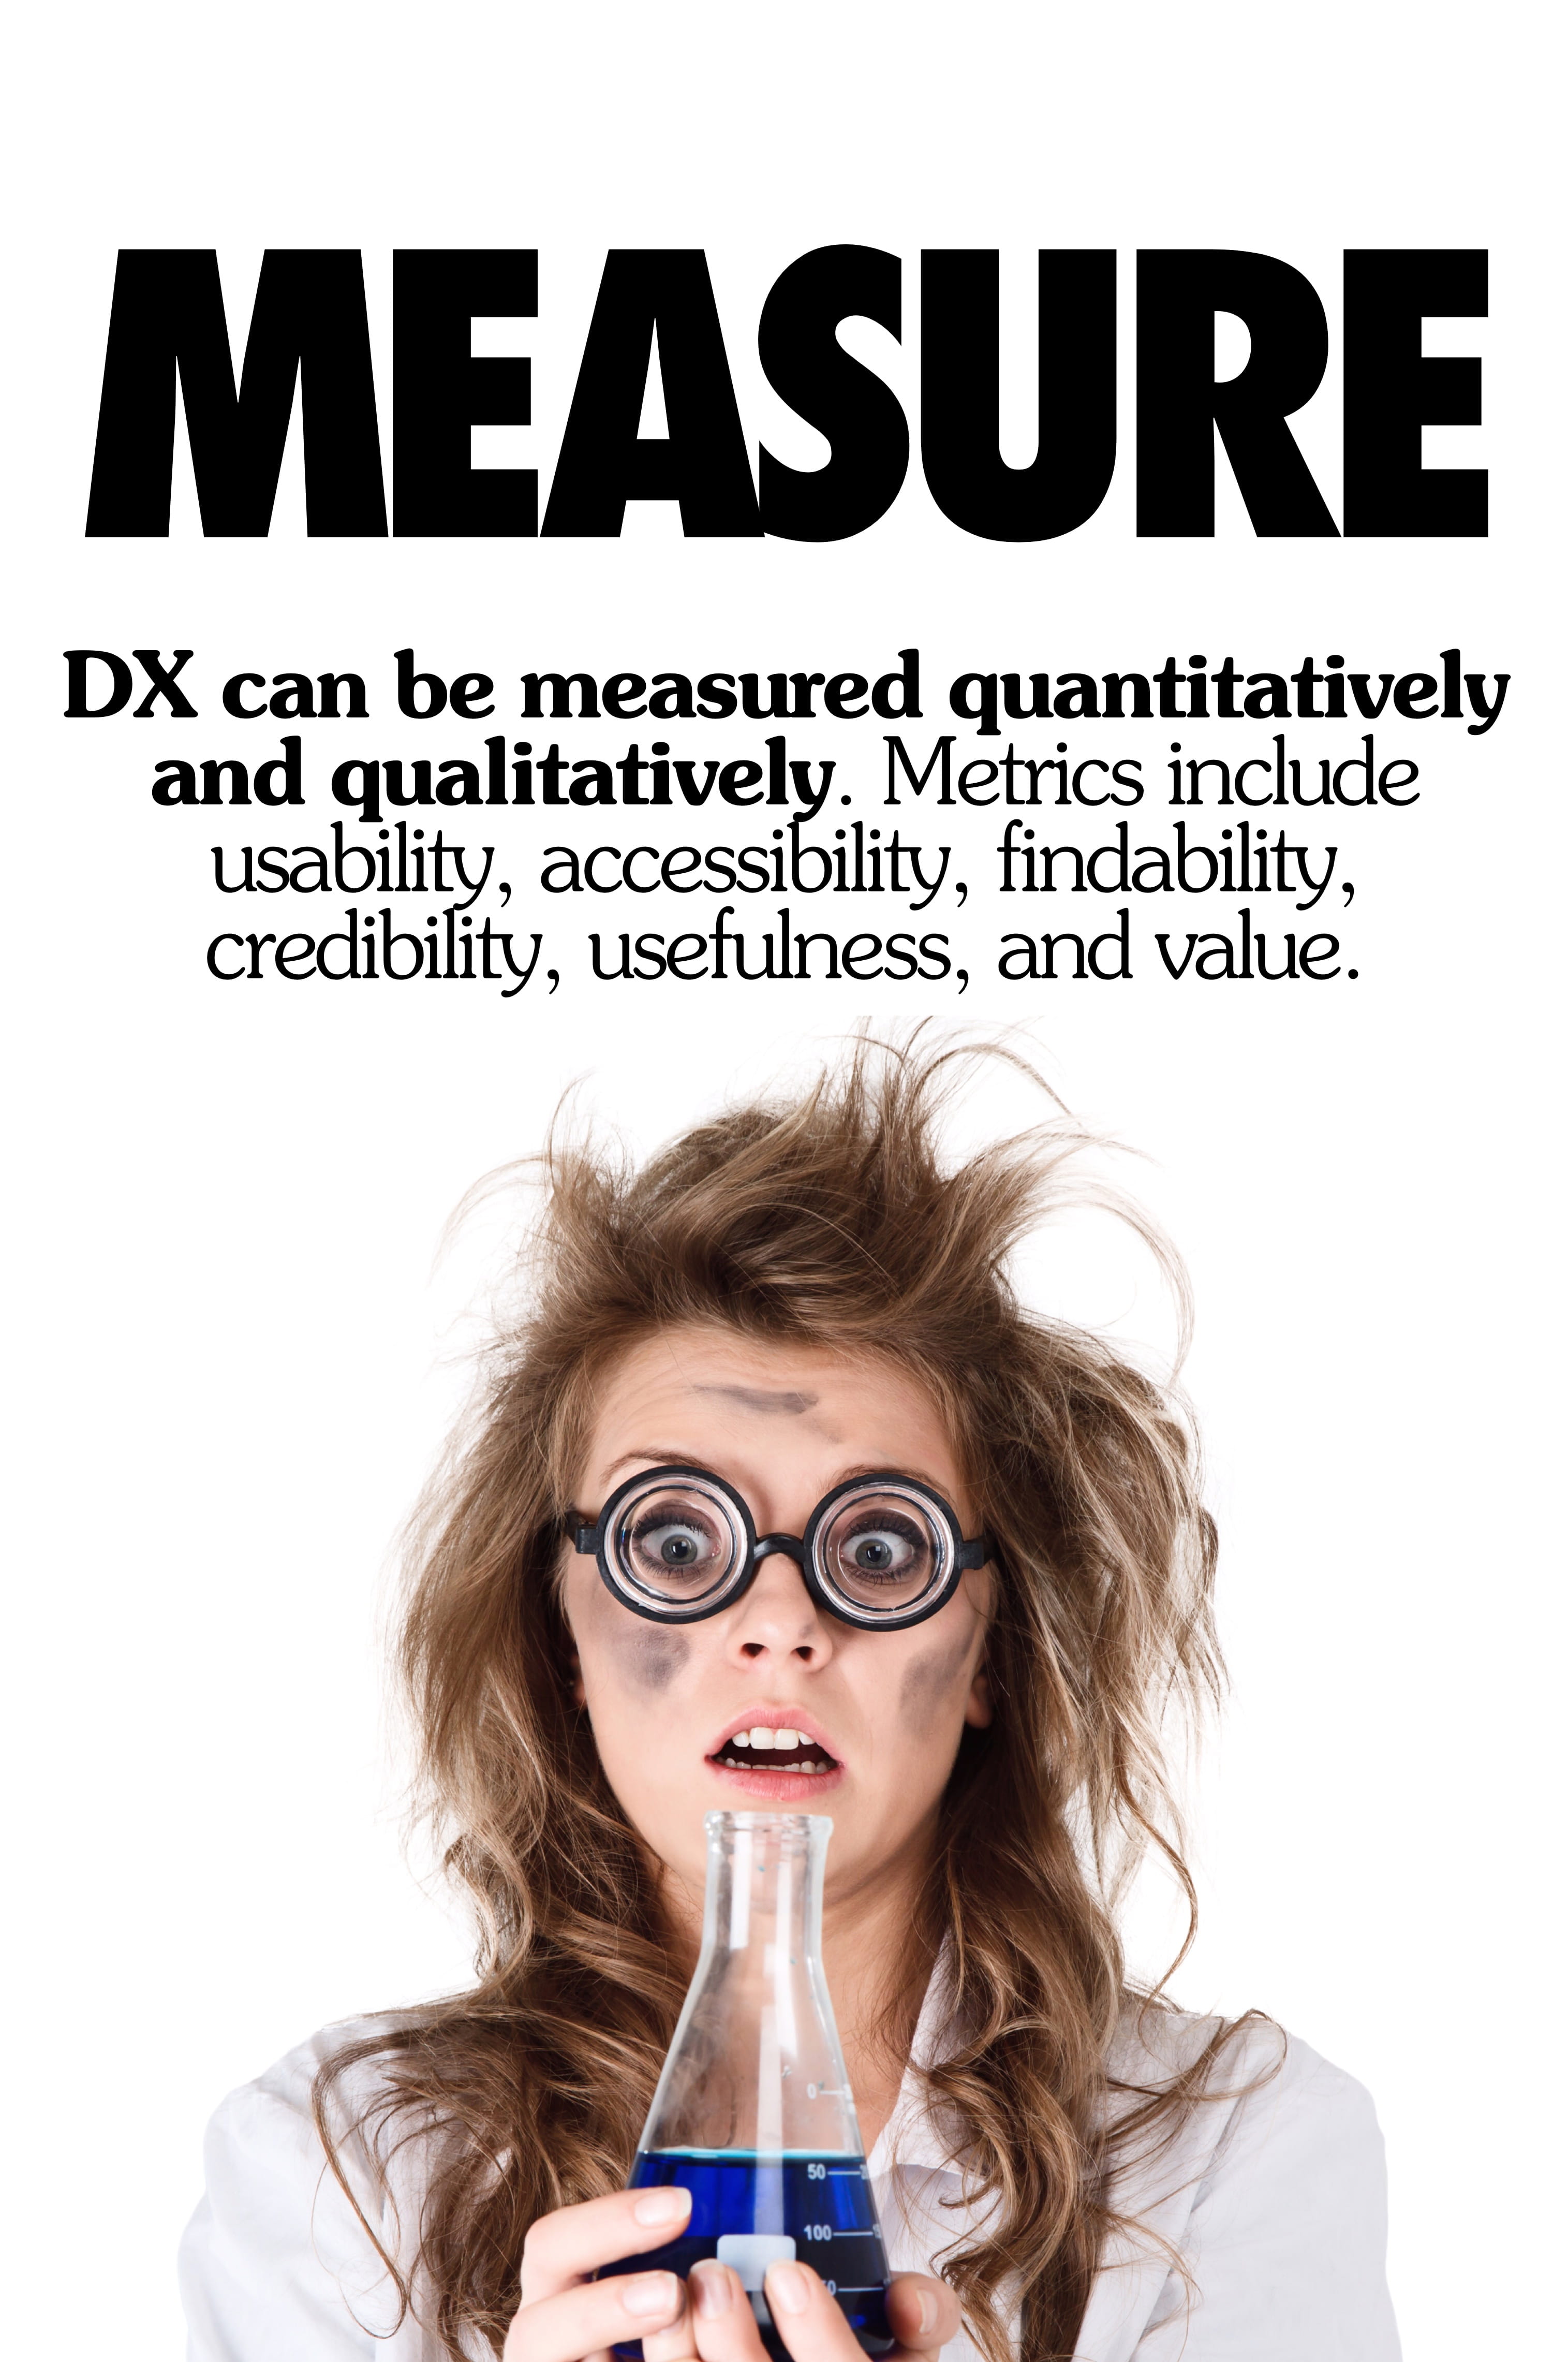 Measure DX. A serene landscape featuring a majestic mountain peak surrounded by lush greenery and a calm, reflective lake. DX can be measured both quantitatively and qualitatively through metrics like usability, accessibility, findability, credibility, usefulness, and value.